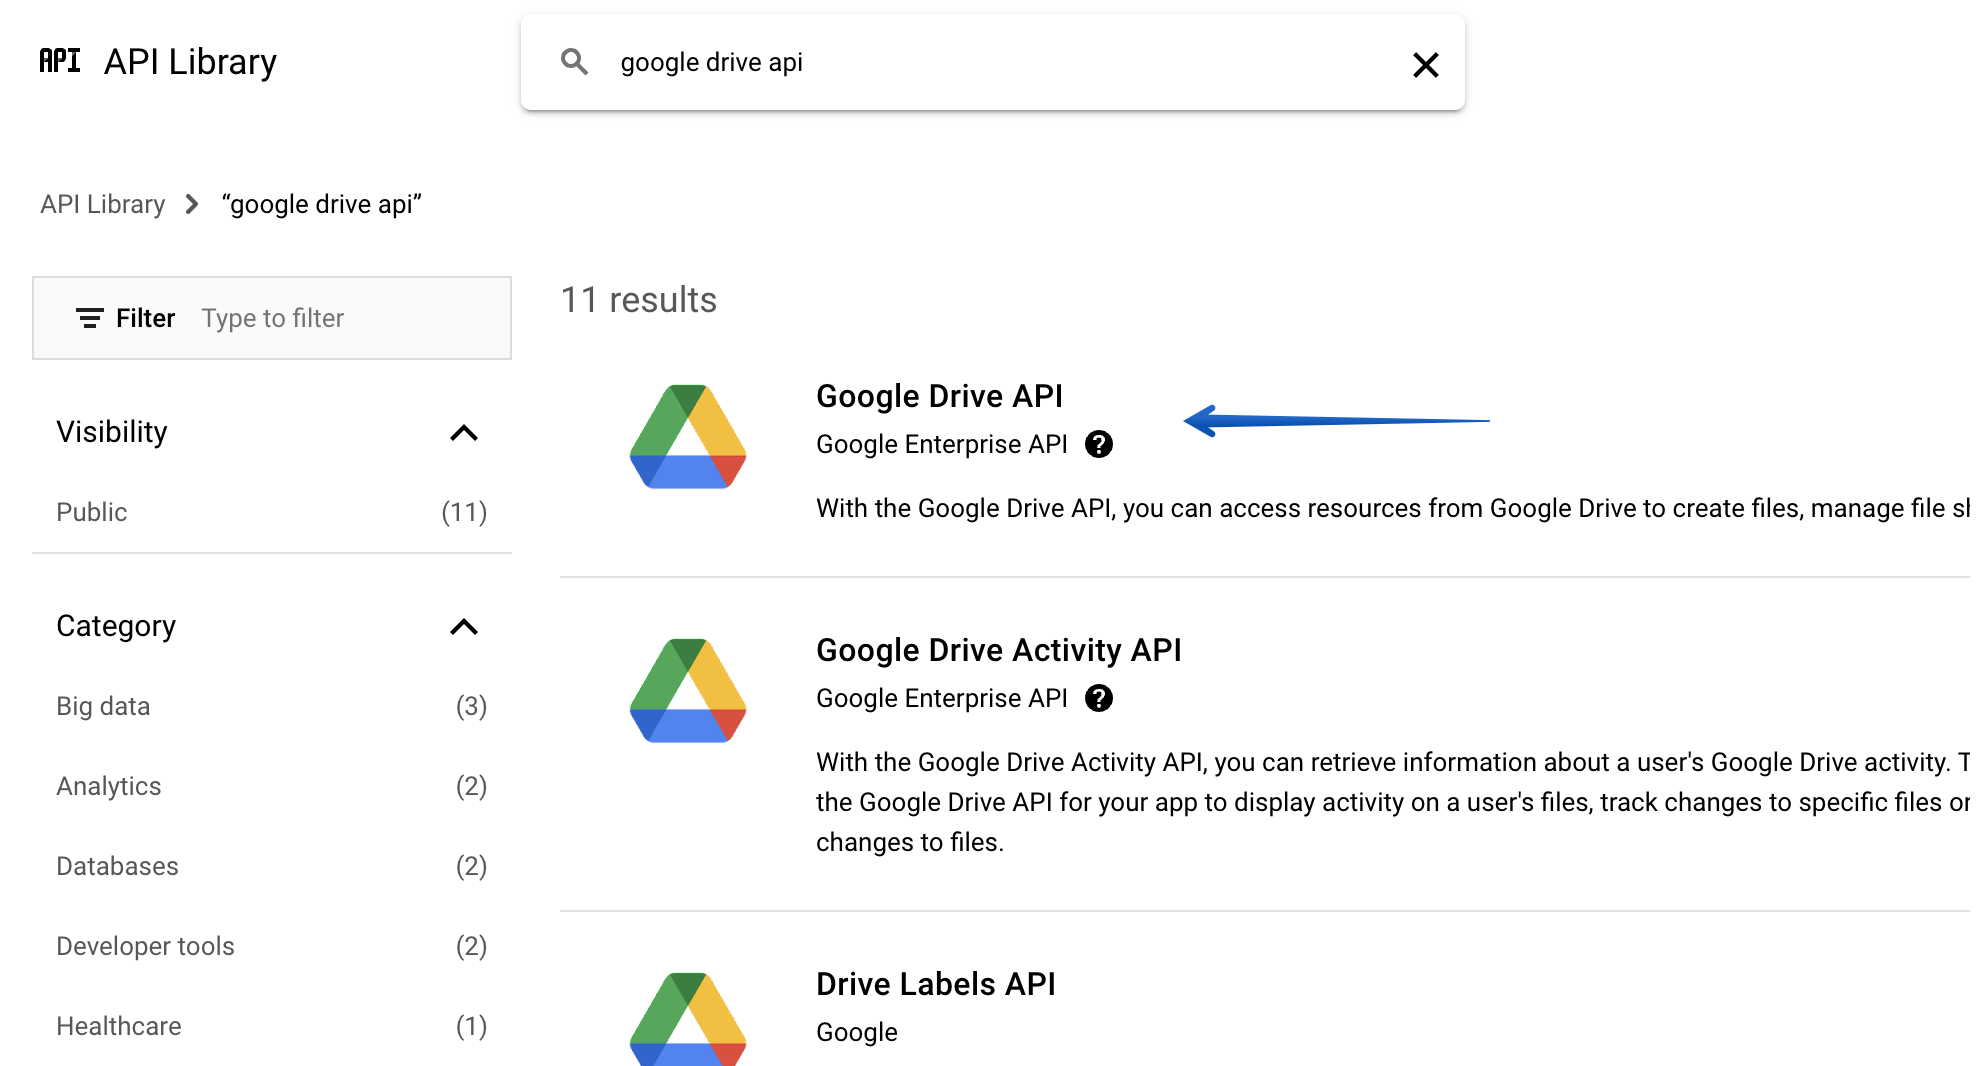 Selecting the Google Drive API in the search results list